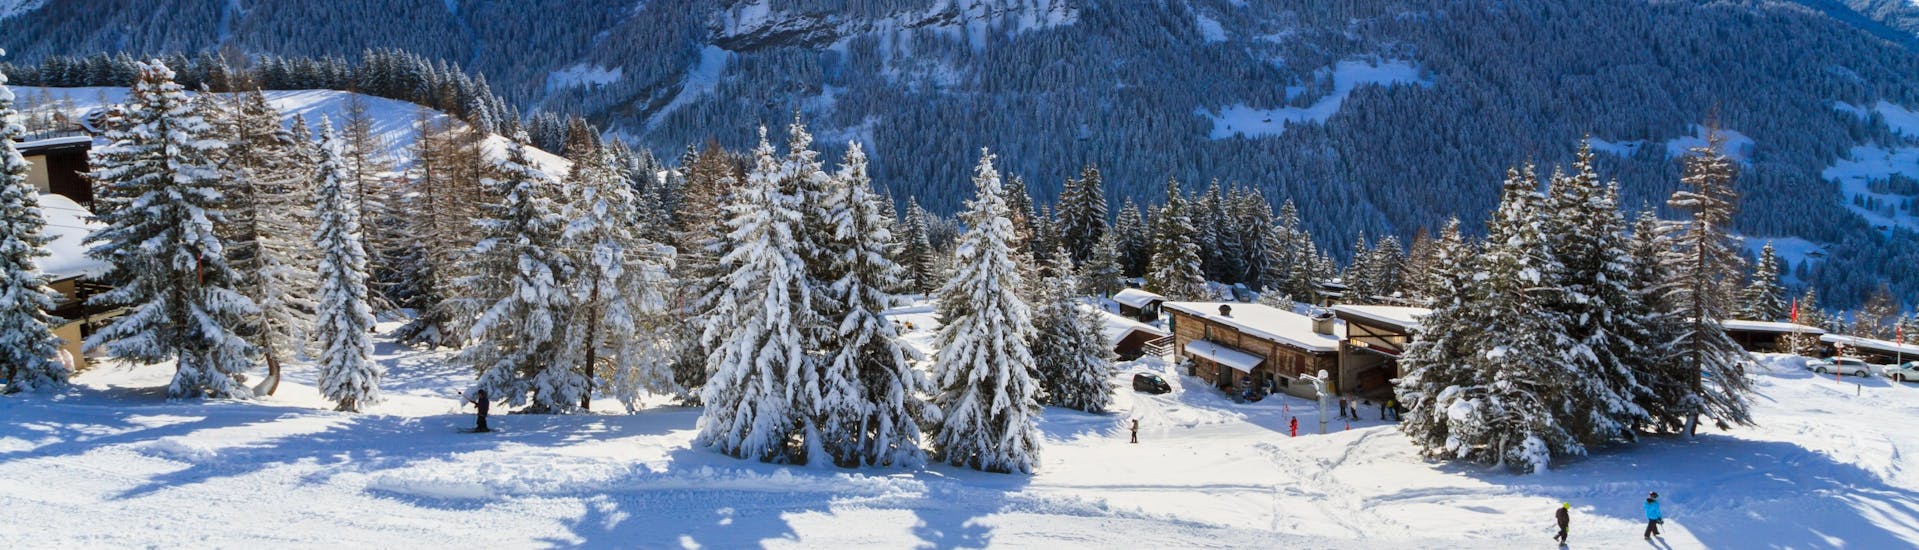 A panoramic view of the ski slopes and the surrounding mountains of Villars, a popular Swiss ski resort  in the Alpes Vaudoises where visitors can book ski lessons with one of the local ski schools.